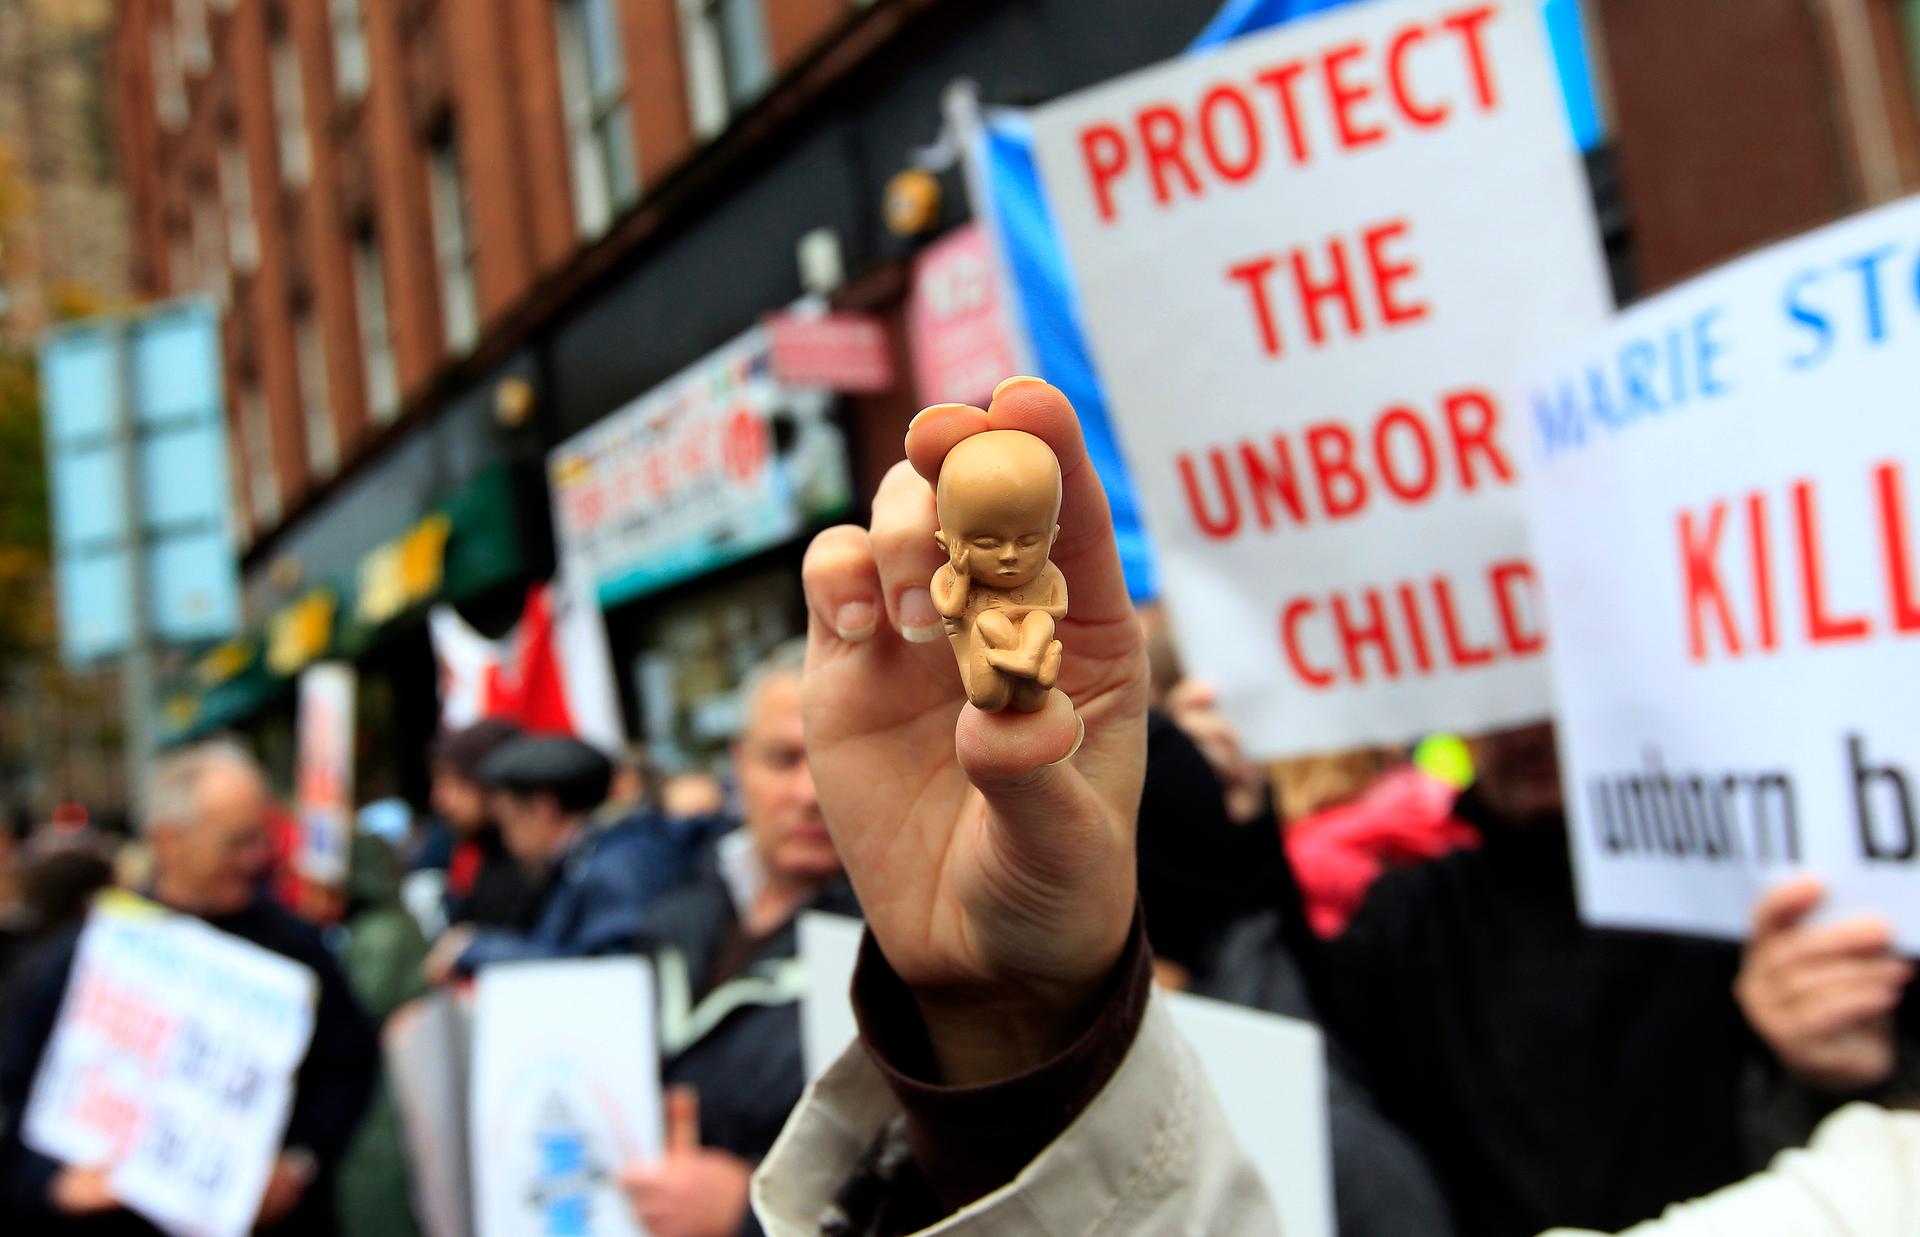 Pro-life protestors demonstrate in Belfast 2012. Even after today’s ruling abortion remains illegal in Northern Ireland in most circumstances. 